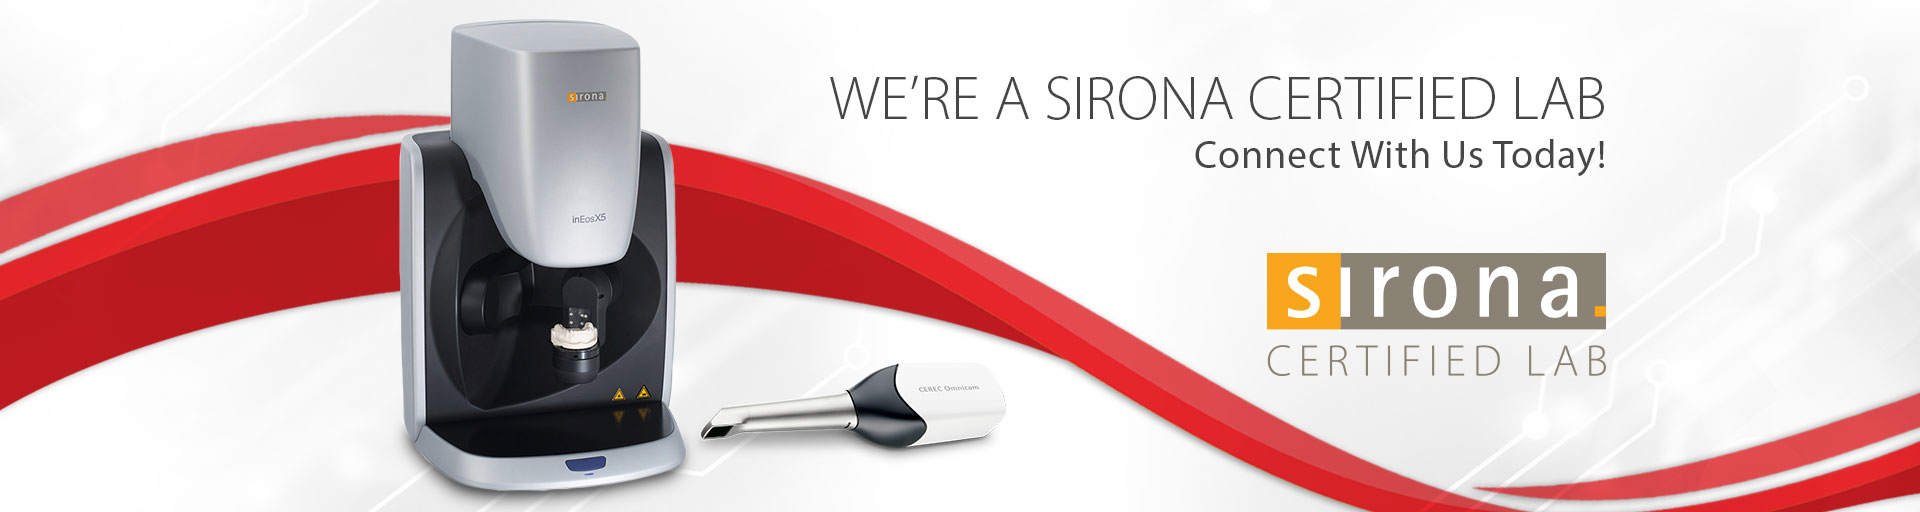 We're a Sirona certified lab.